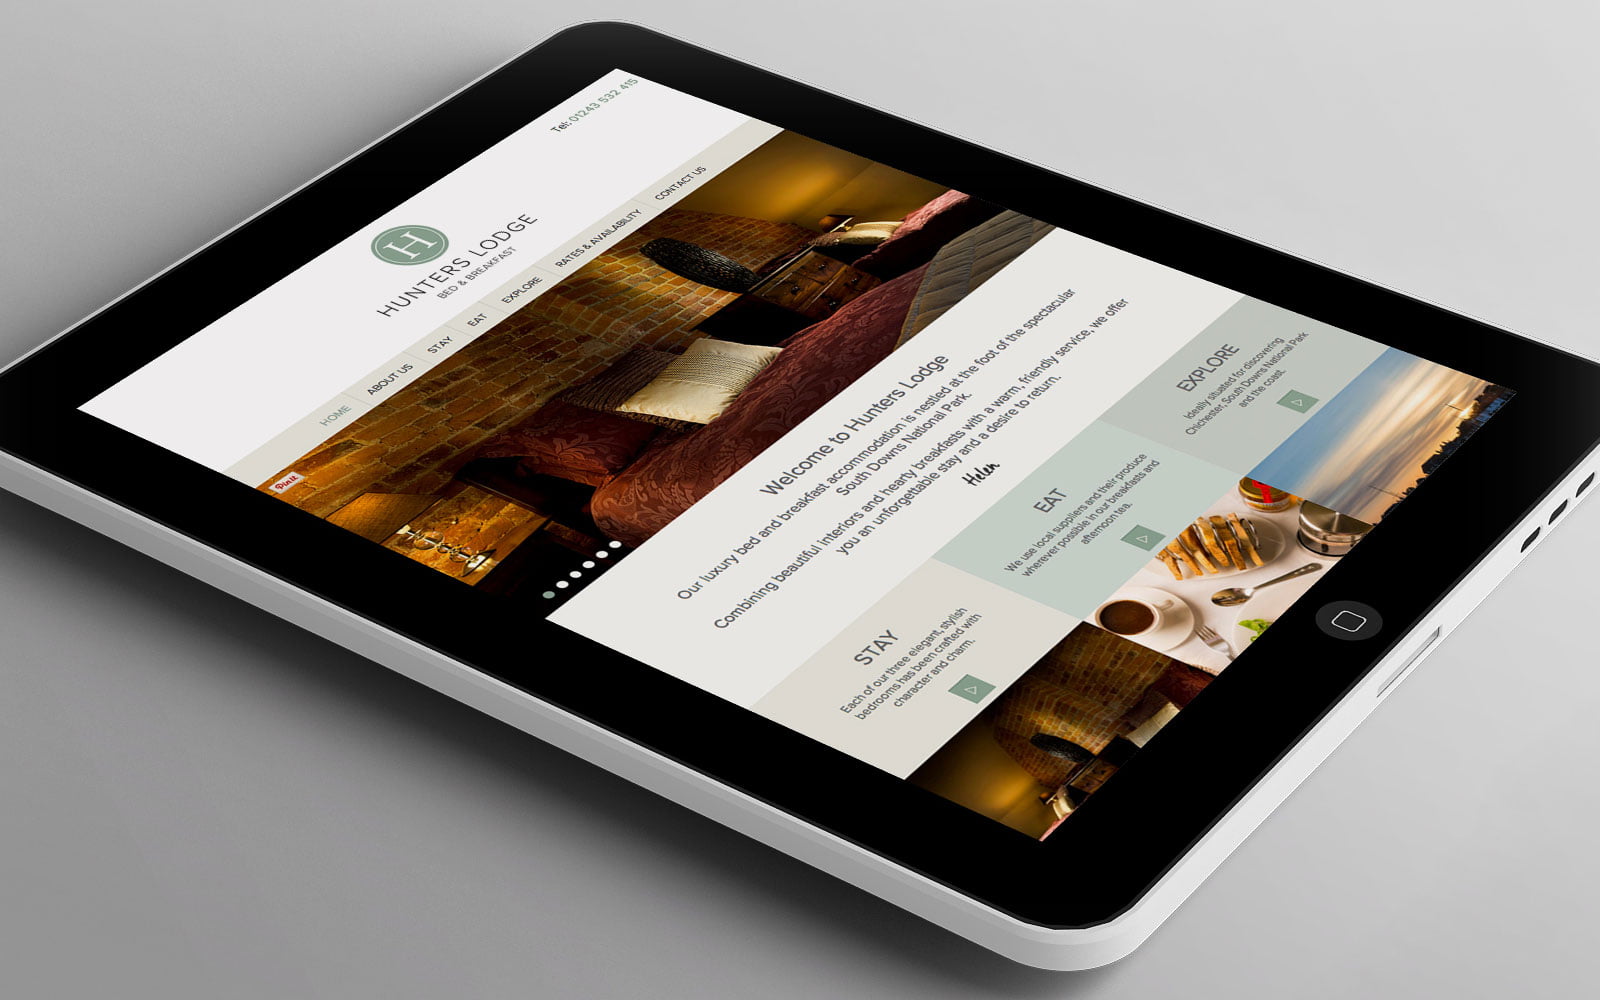 A new website for Hunters Lodge